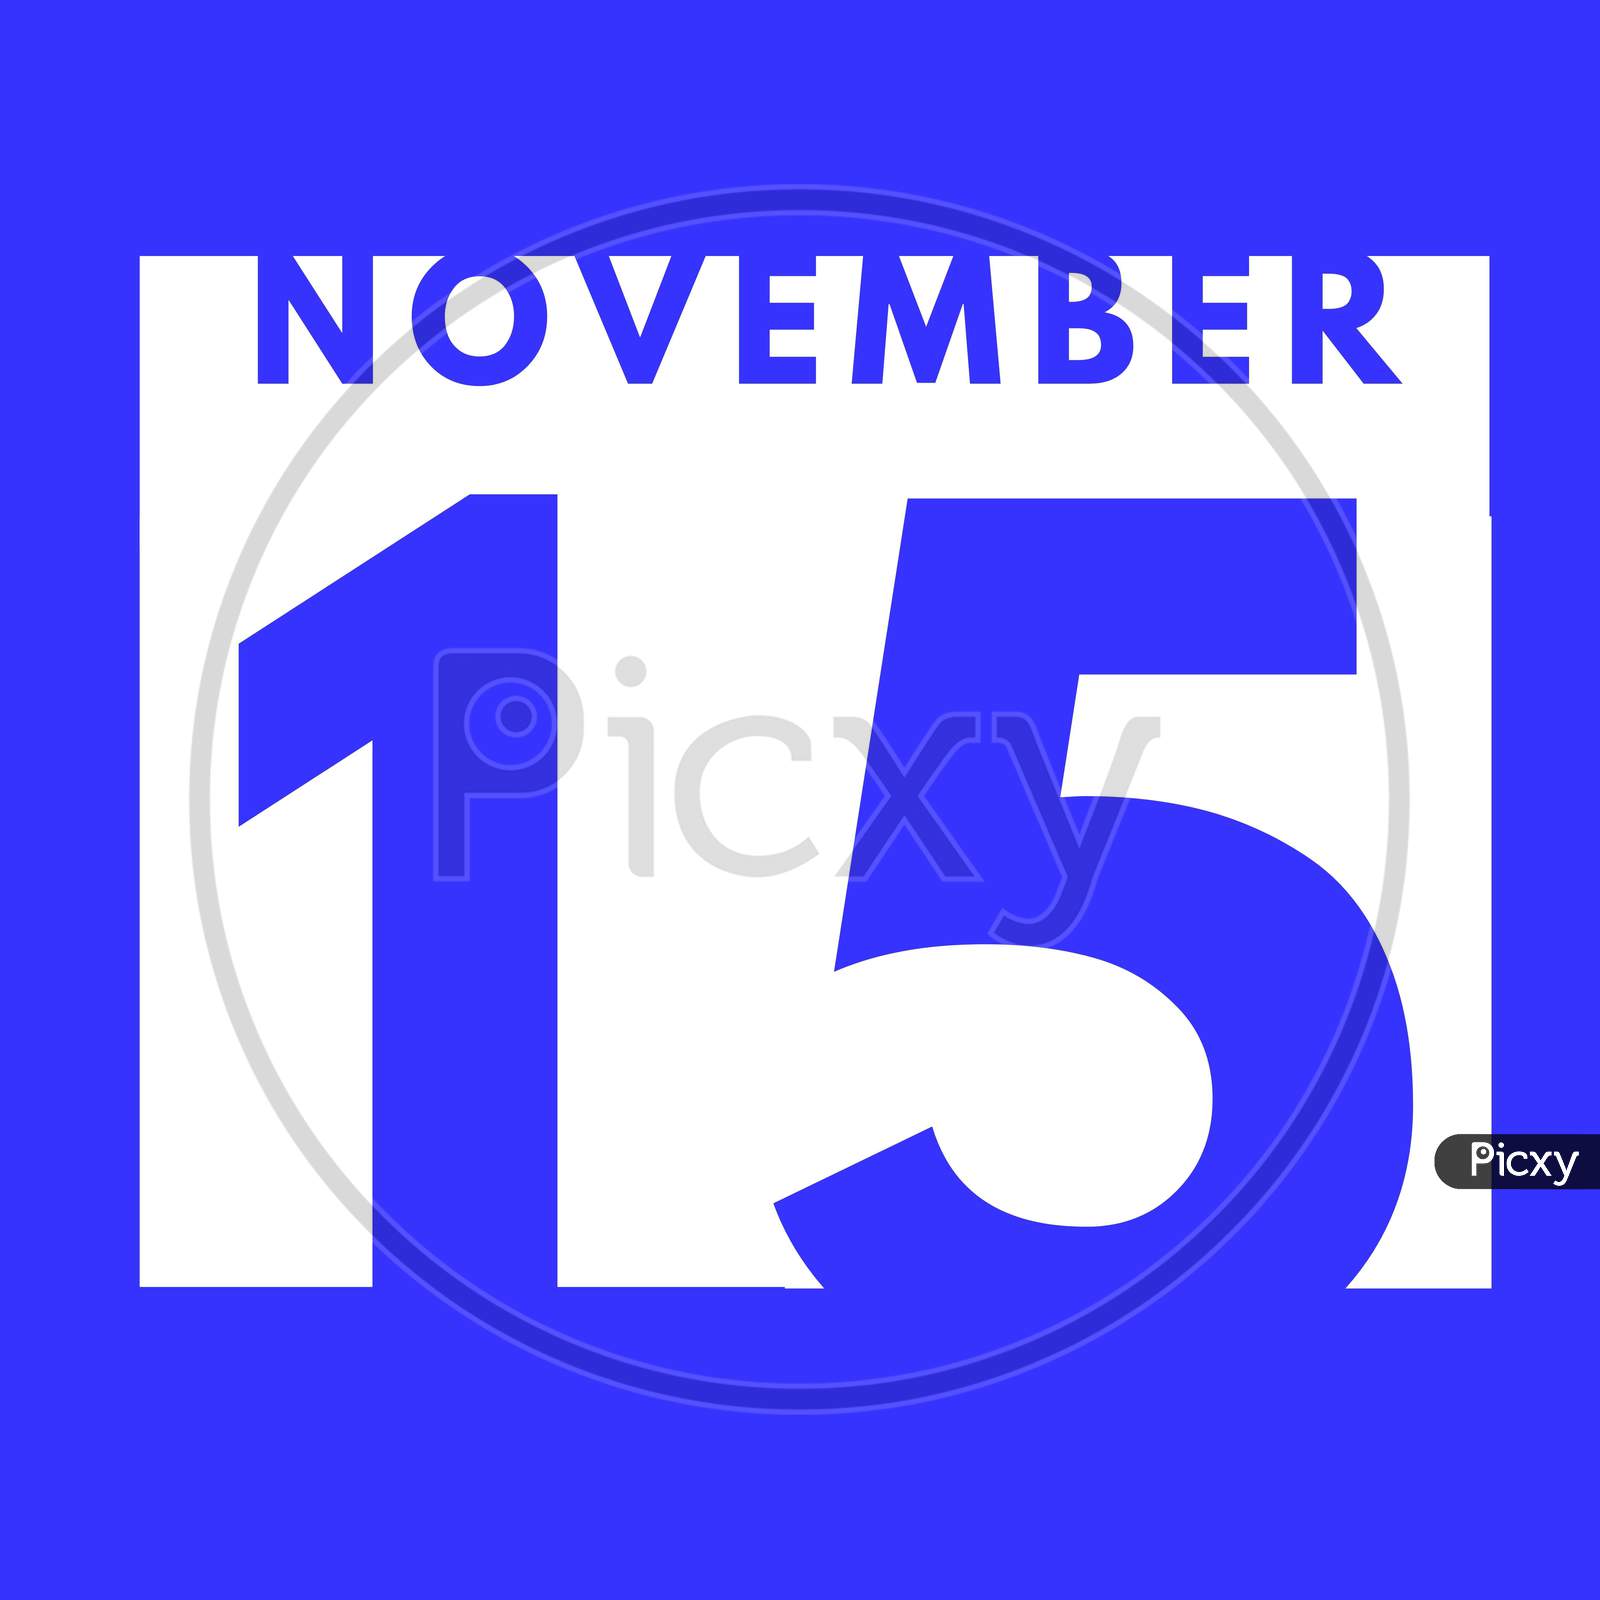 November 15 . Flat Modern Daily Calendar Icon .Date ,Day, Month .Calendar For The Month Of November